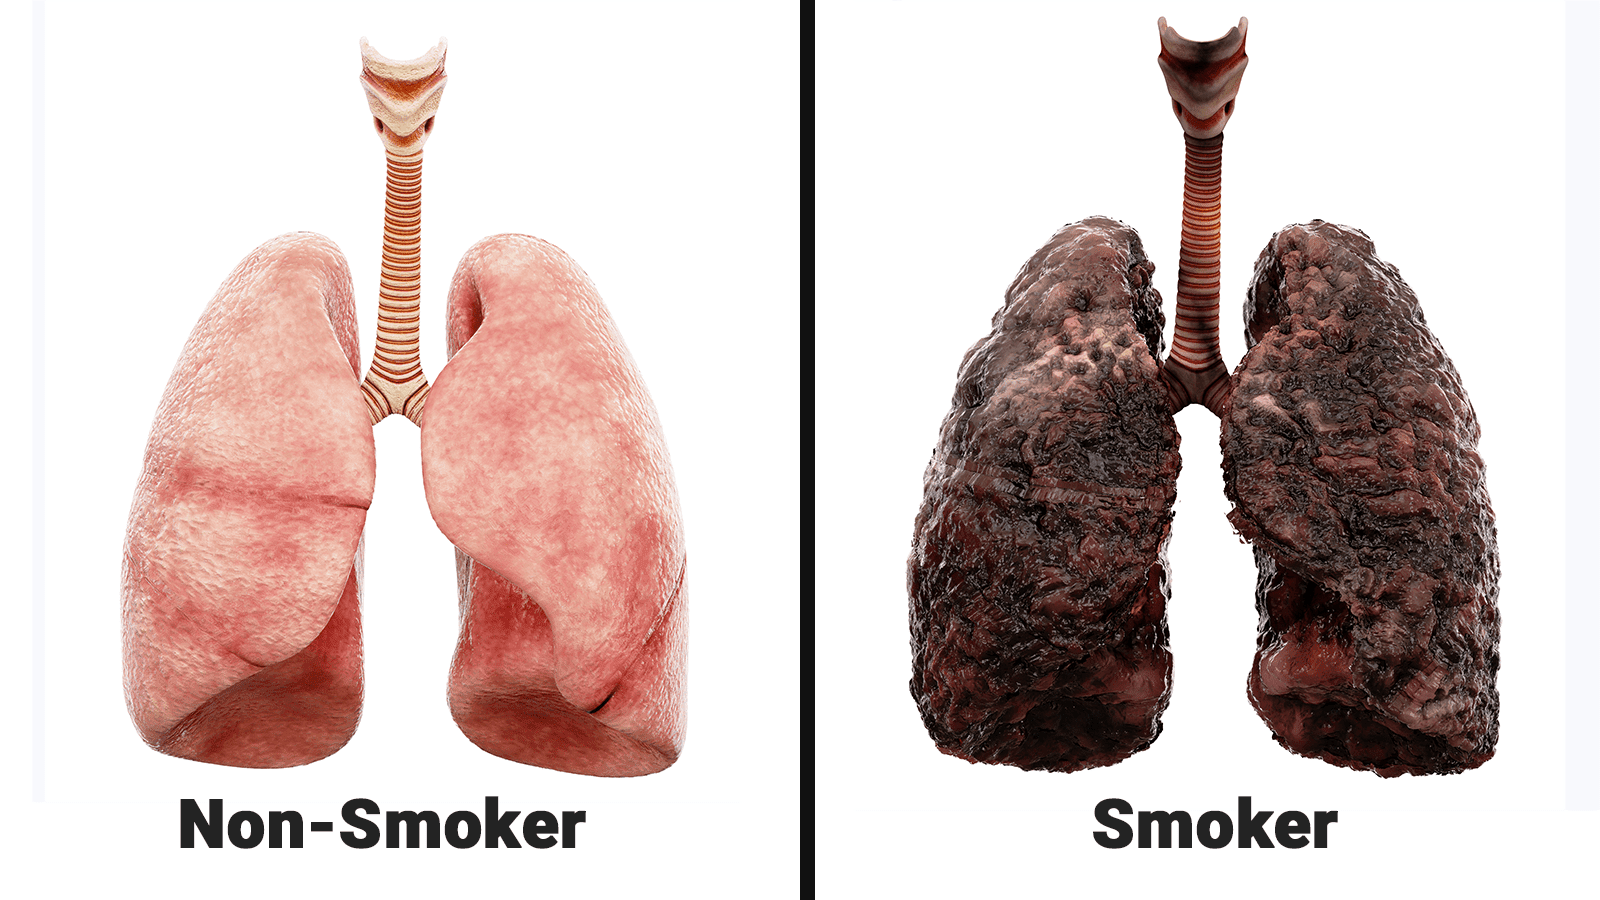 Nurse Explains What Smoking Does Every Day To Your Lungs